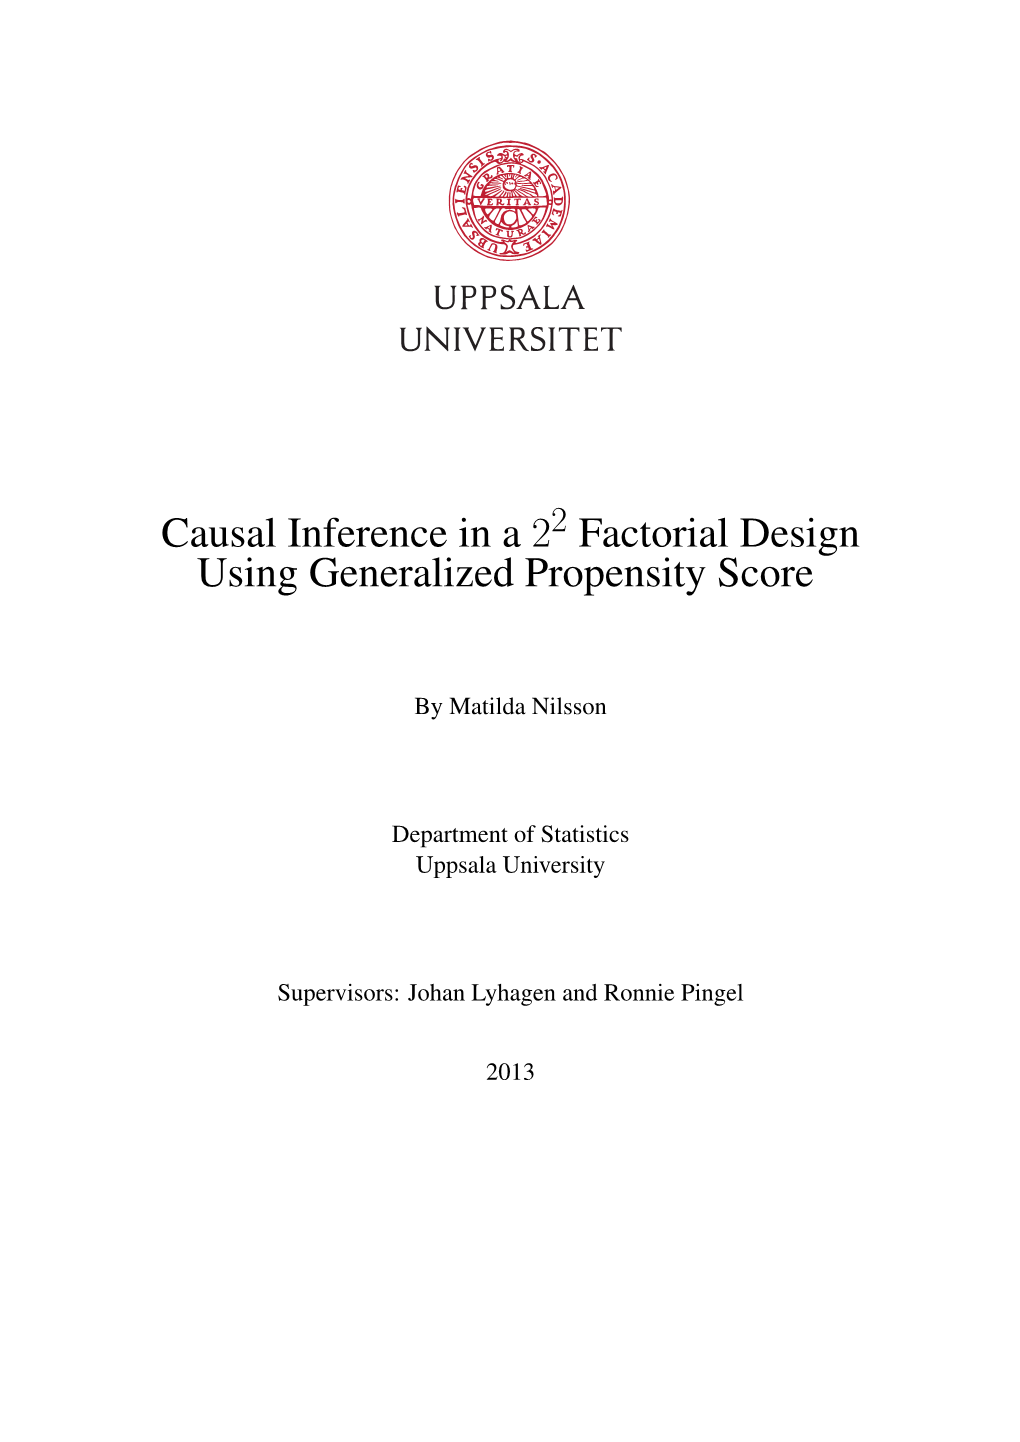 Causal Inference in a 2 Factorial Design Using Generalized